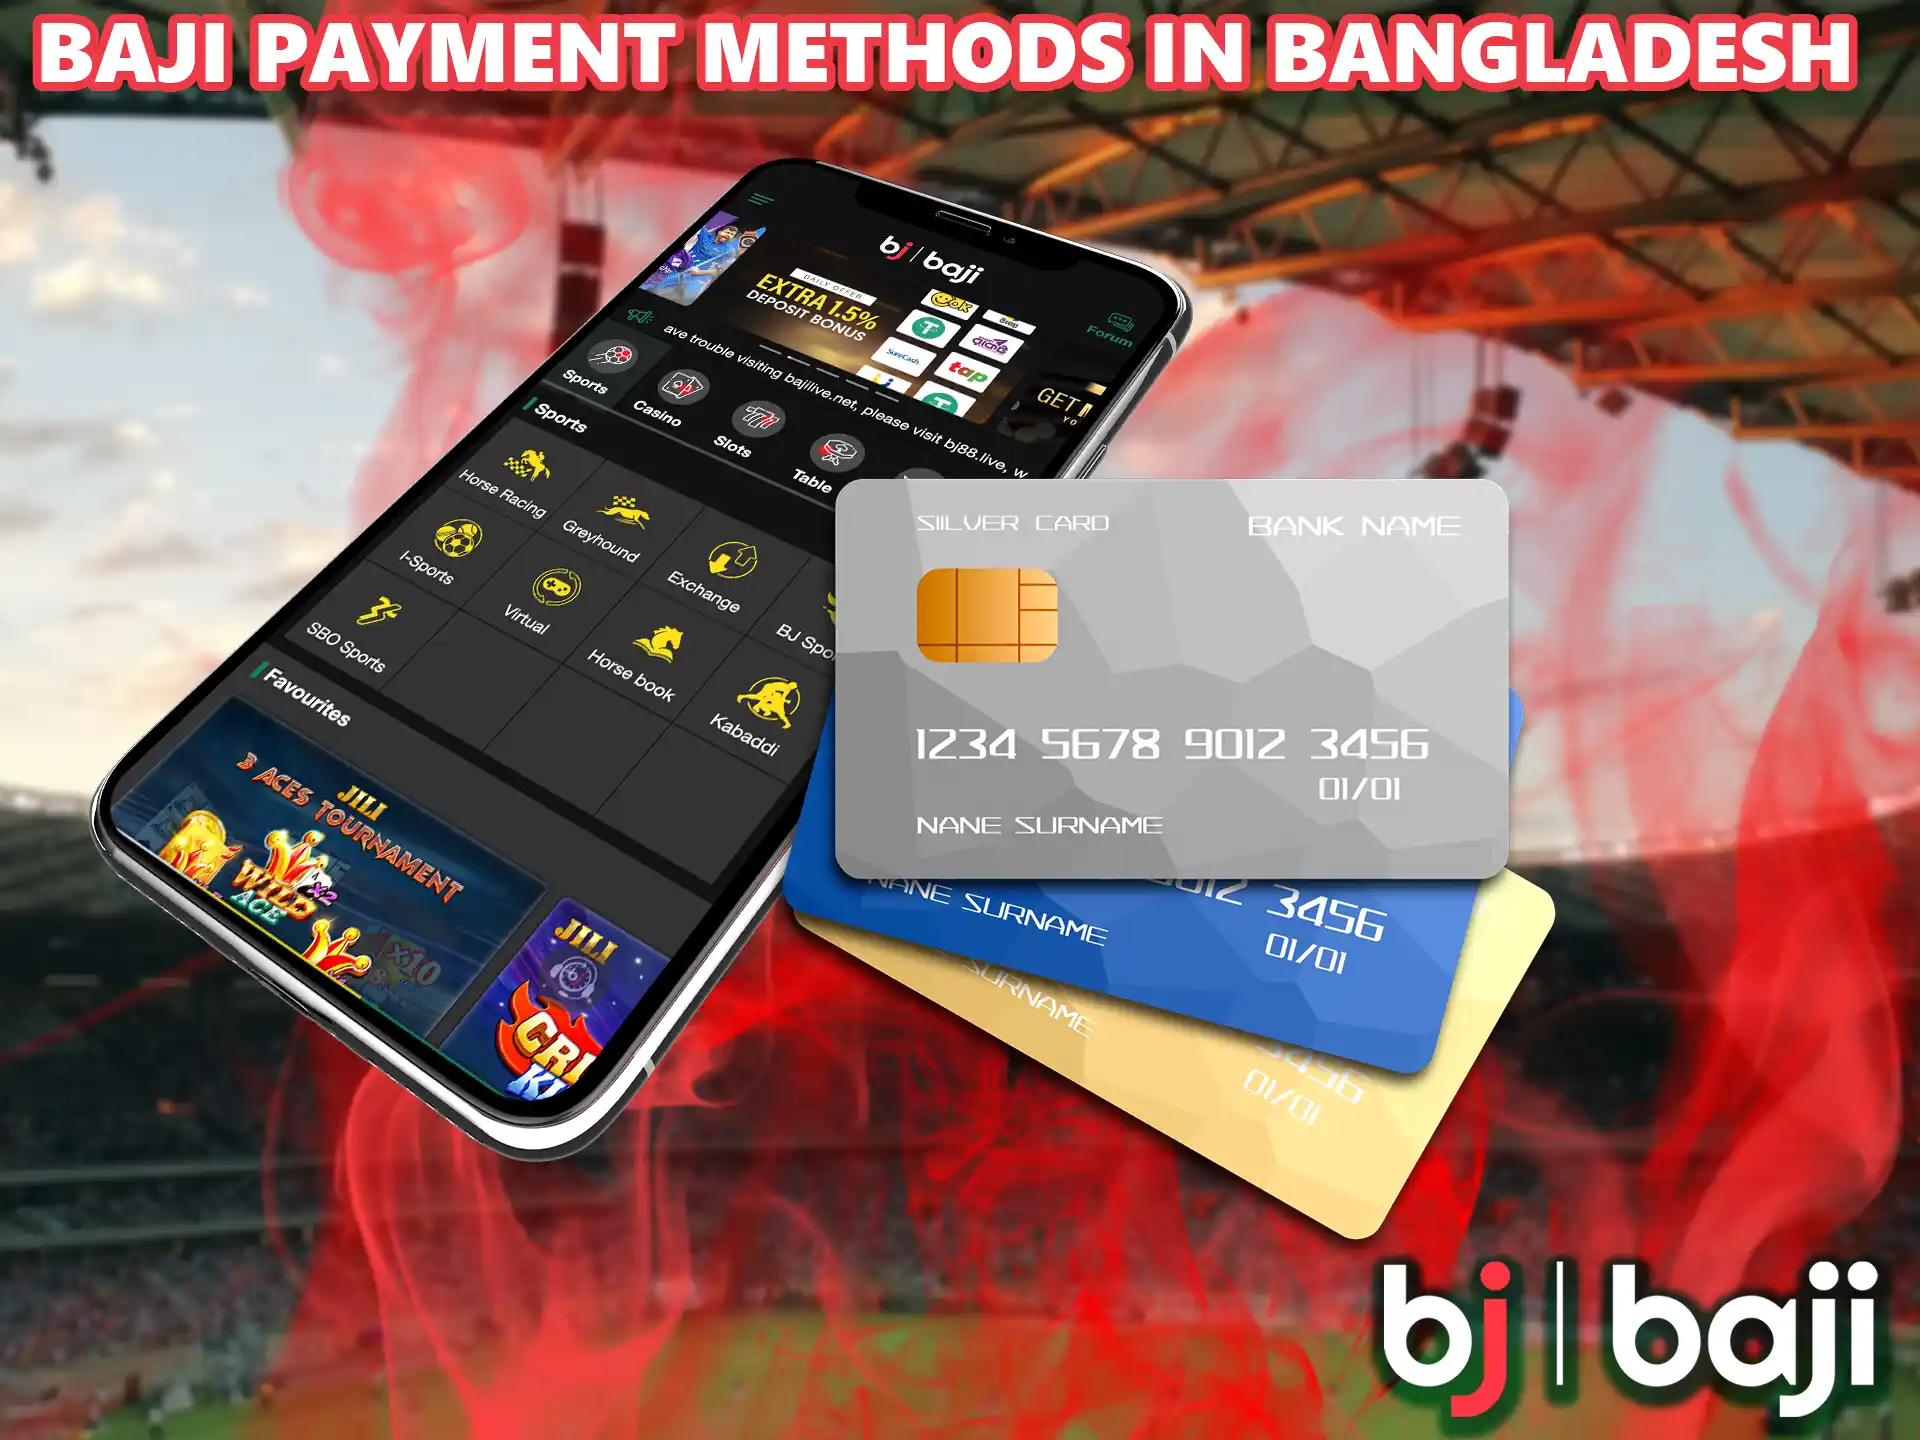 Deposit and withdraw money to Baji using banking systems popular in Bangladesh.